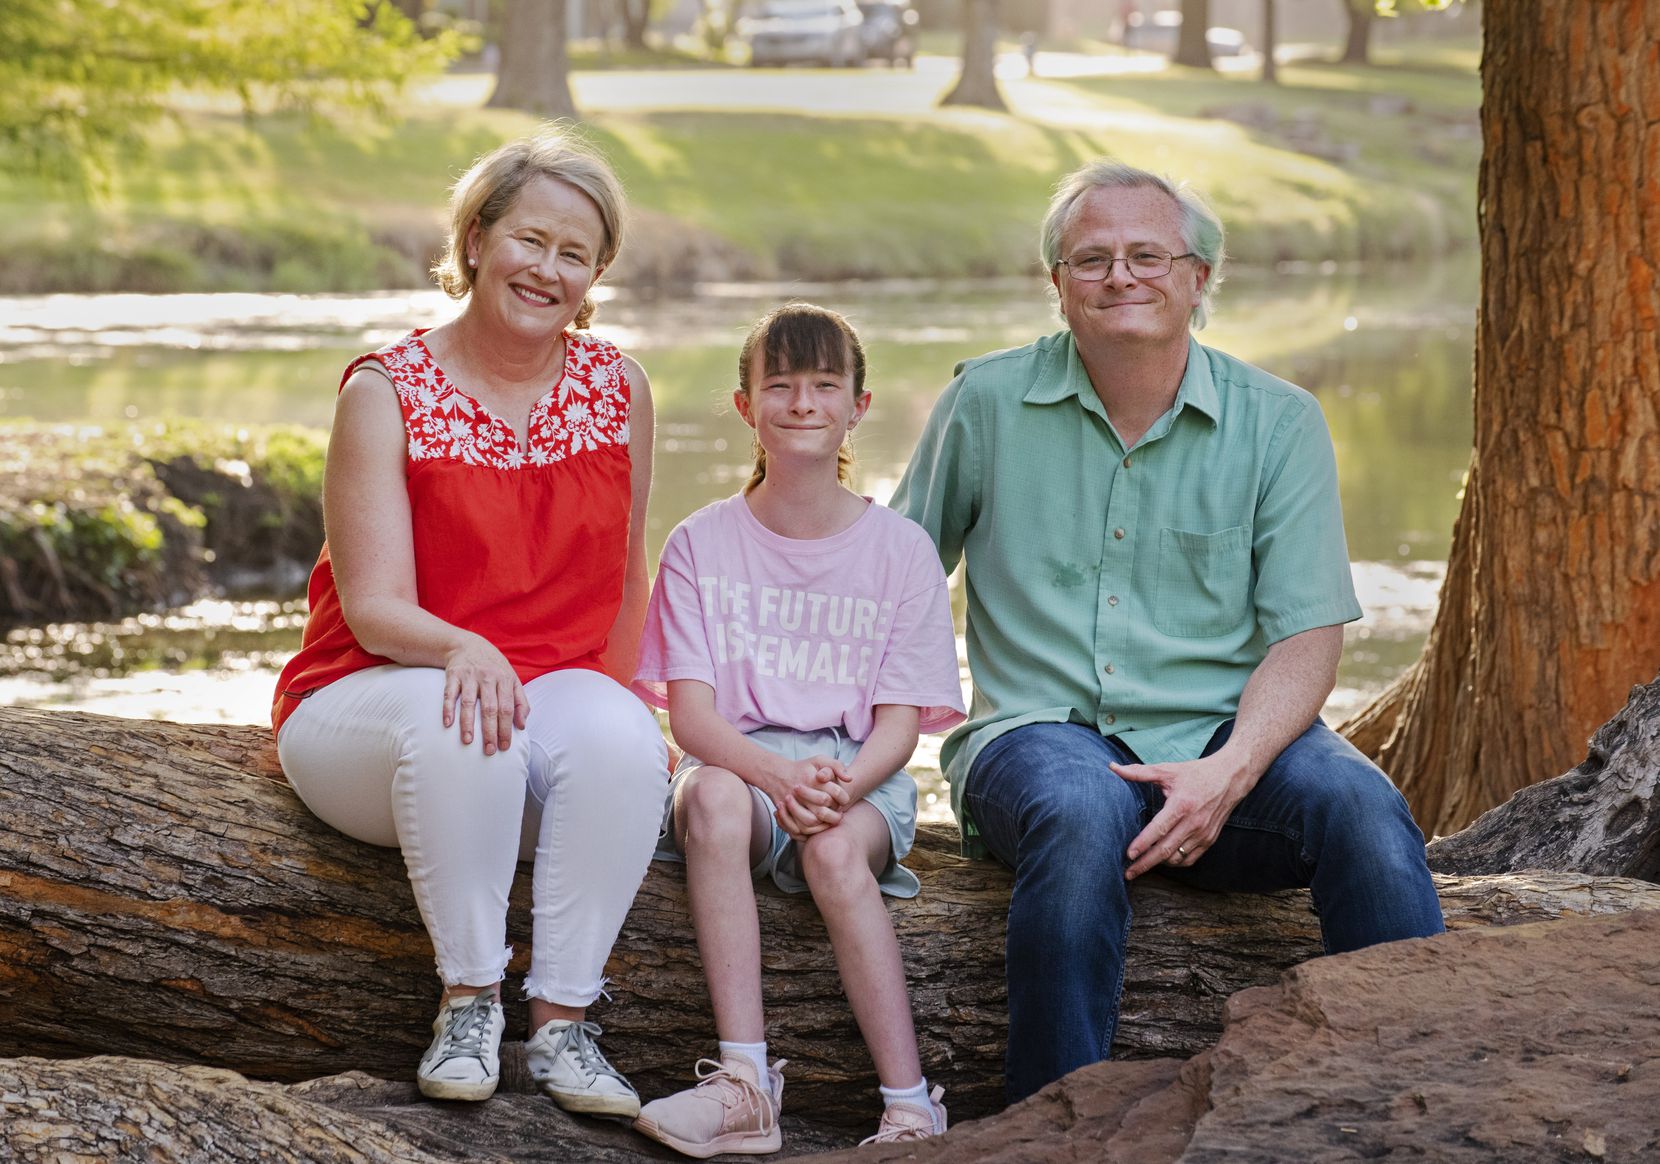 Claire Aldridge, left, Matt Burnside, and their 12-year-old daughter Lucy Burnside at a city...